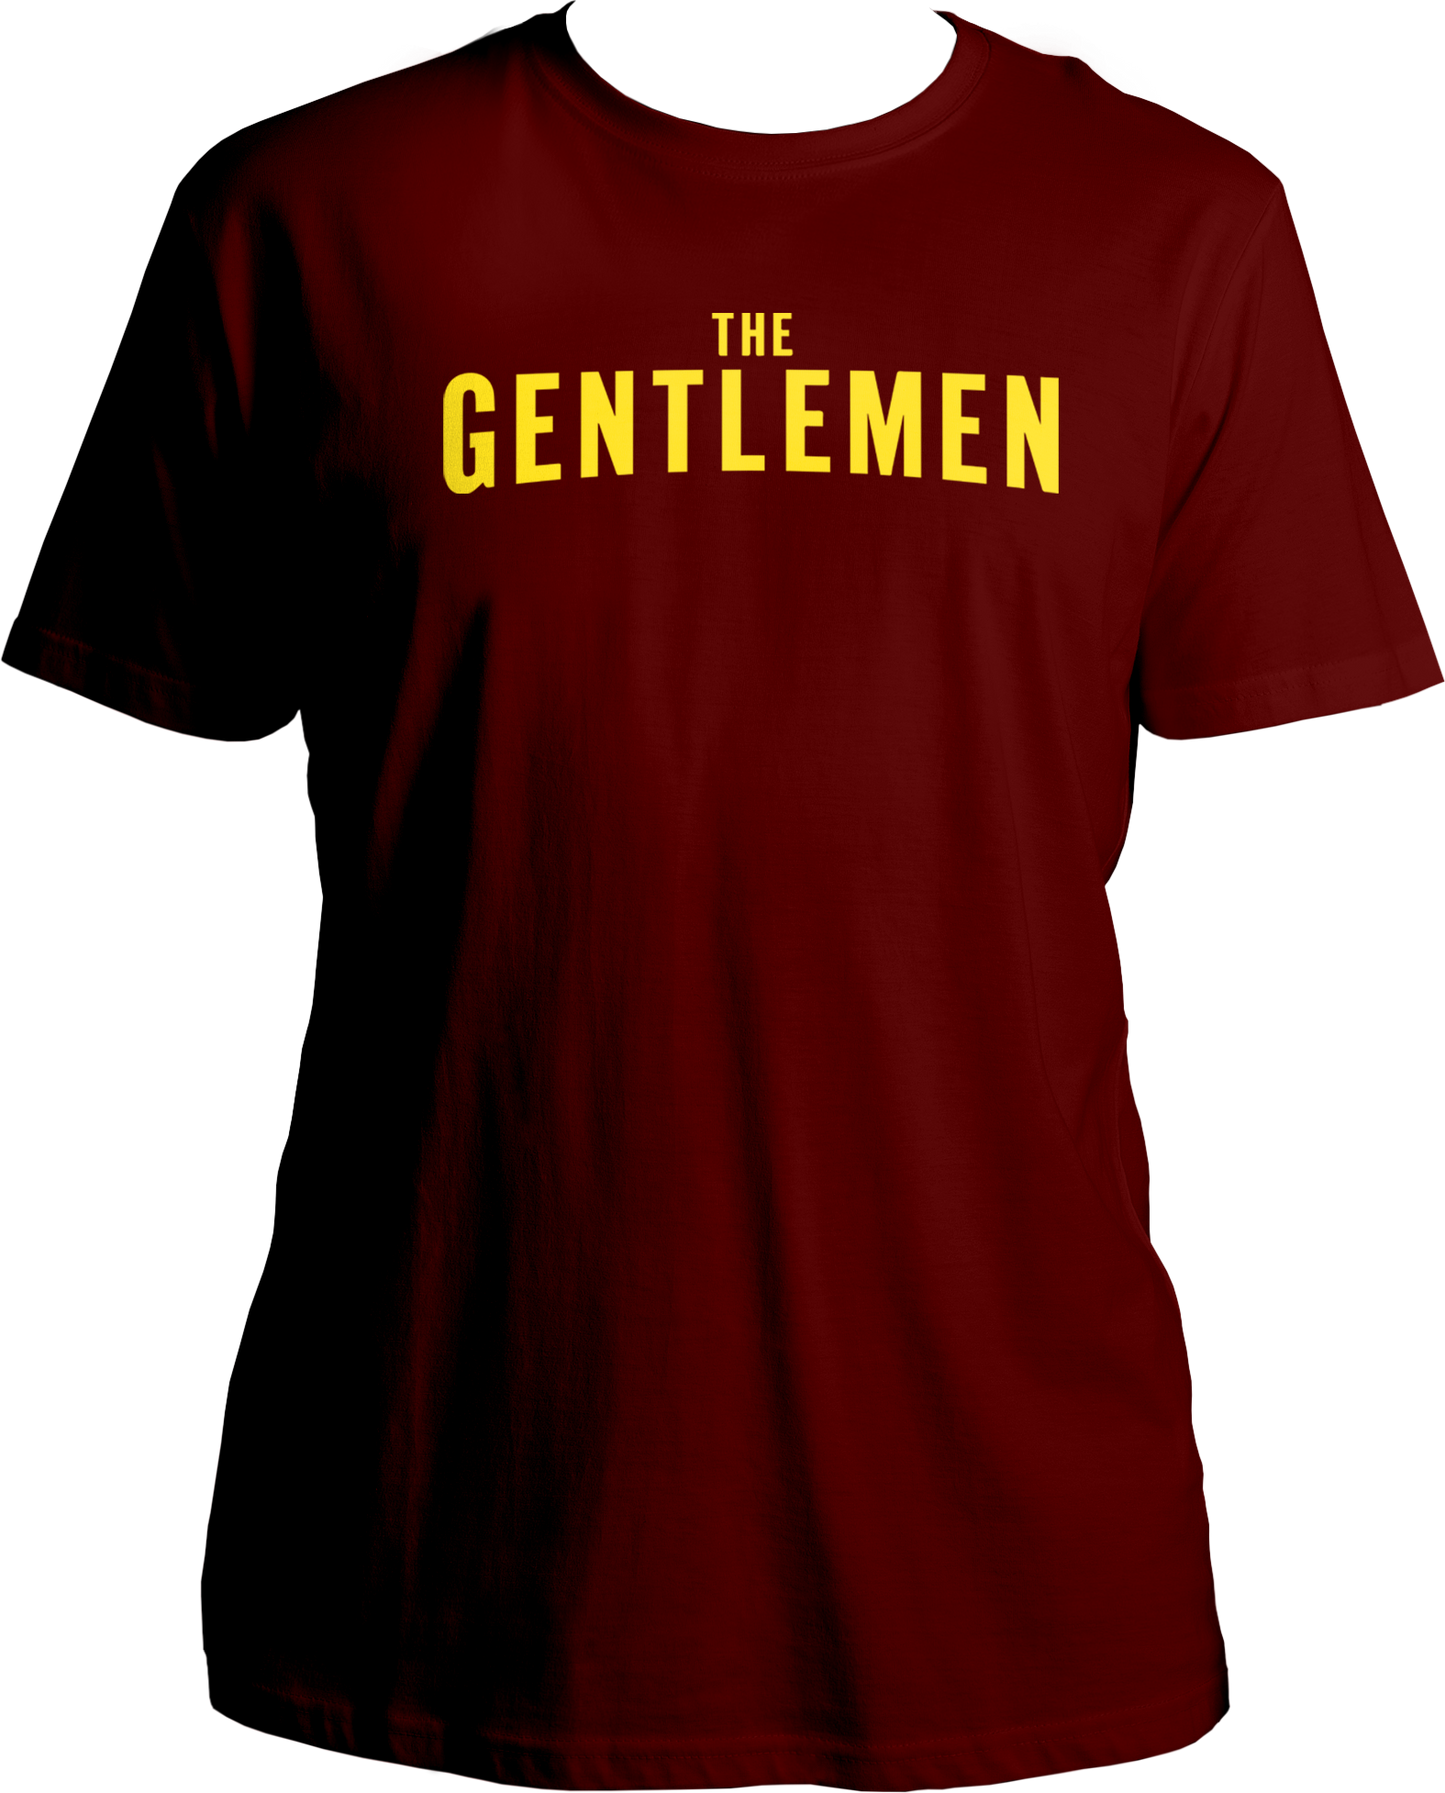 Whether you're a die-hard fan of The Gentlemen or simply appreciate quality apparel with a touch of pop culture flair, this t-shirt is a must-have addition to your wardrobe. Join the ranks of stylish fans and make a statement that's as sharp and witty as the show itself. Grab yours now and step into the world of The Gentlemen!